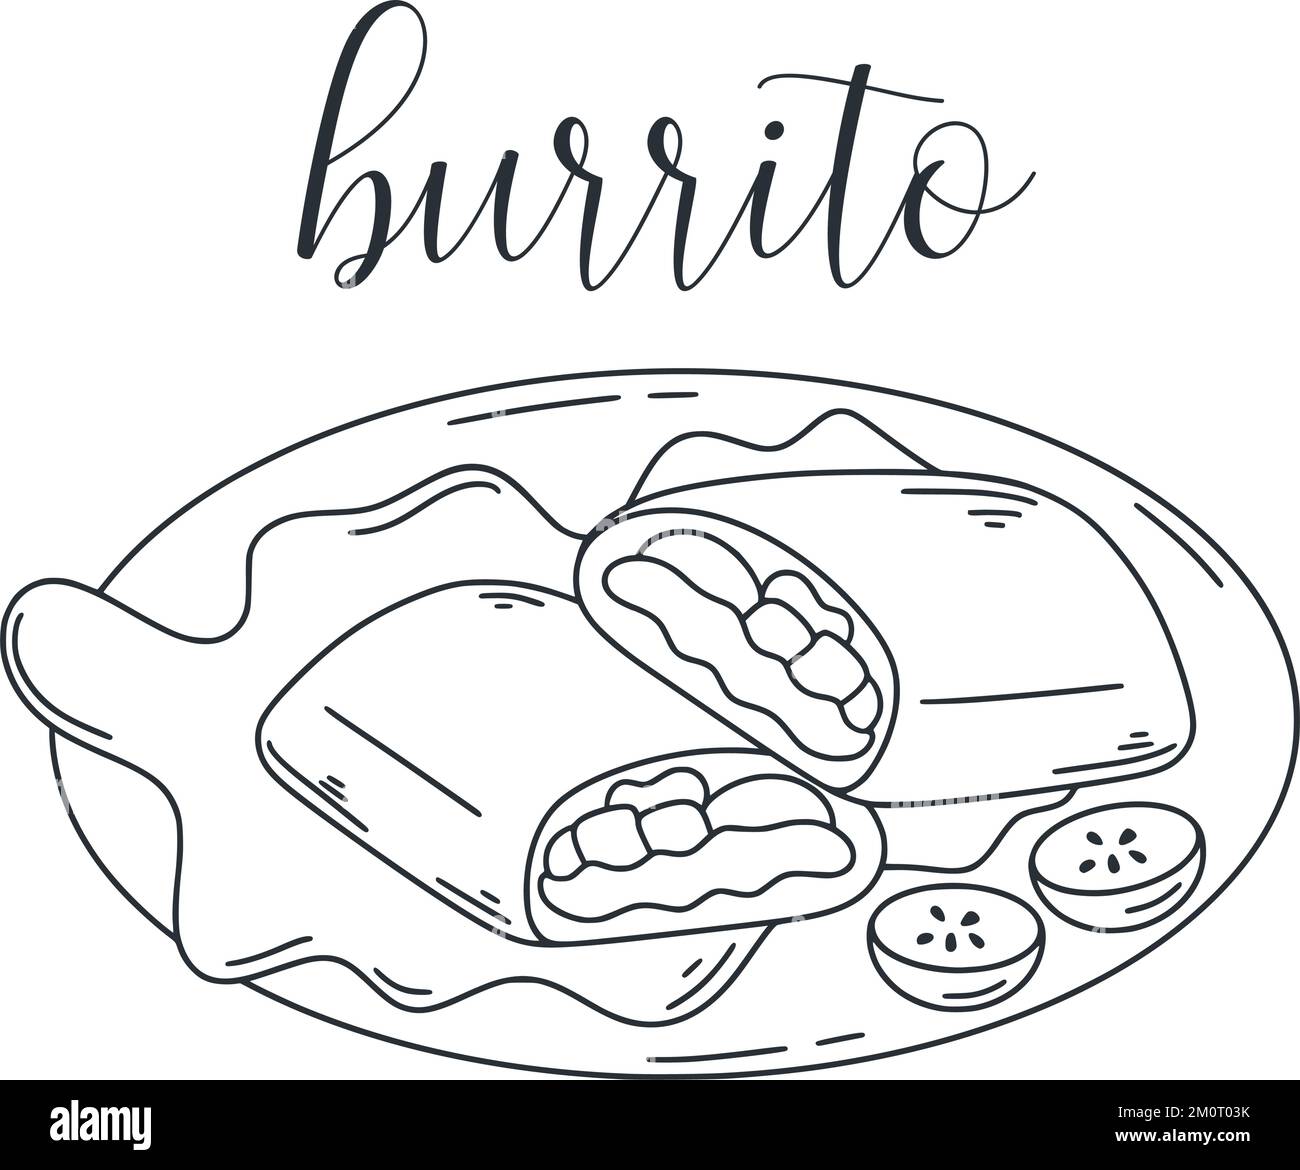 Mexican traditional dish burrito doodle illustration. Wheat tortilla stuffed with meat and vegetables clip art. Latin American food vector Stock Vector